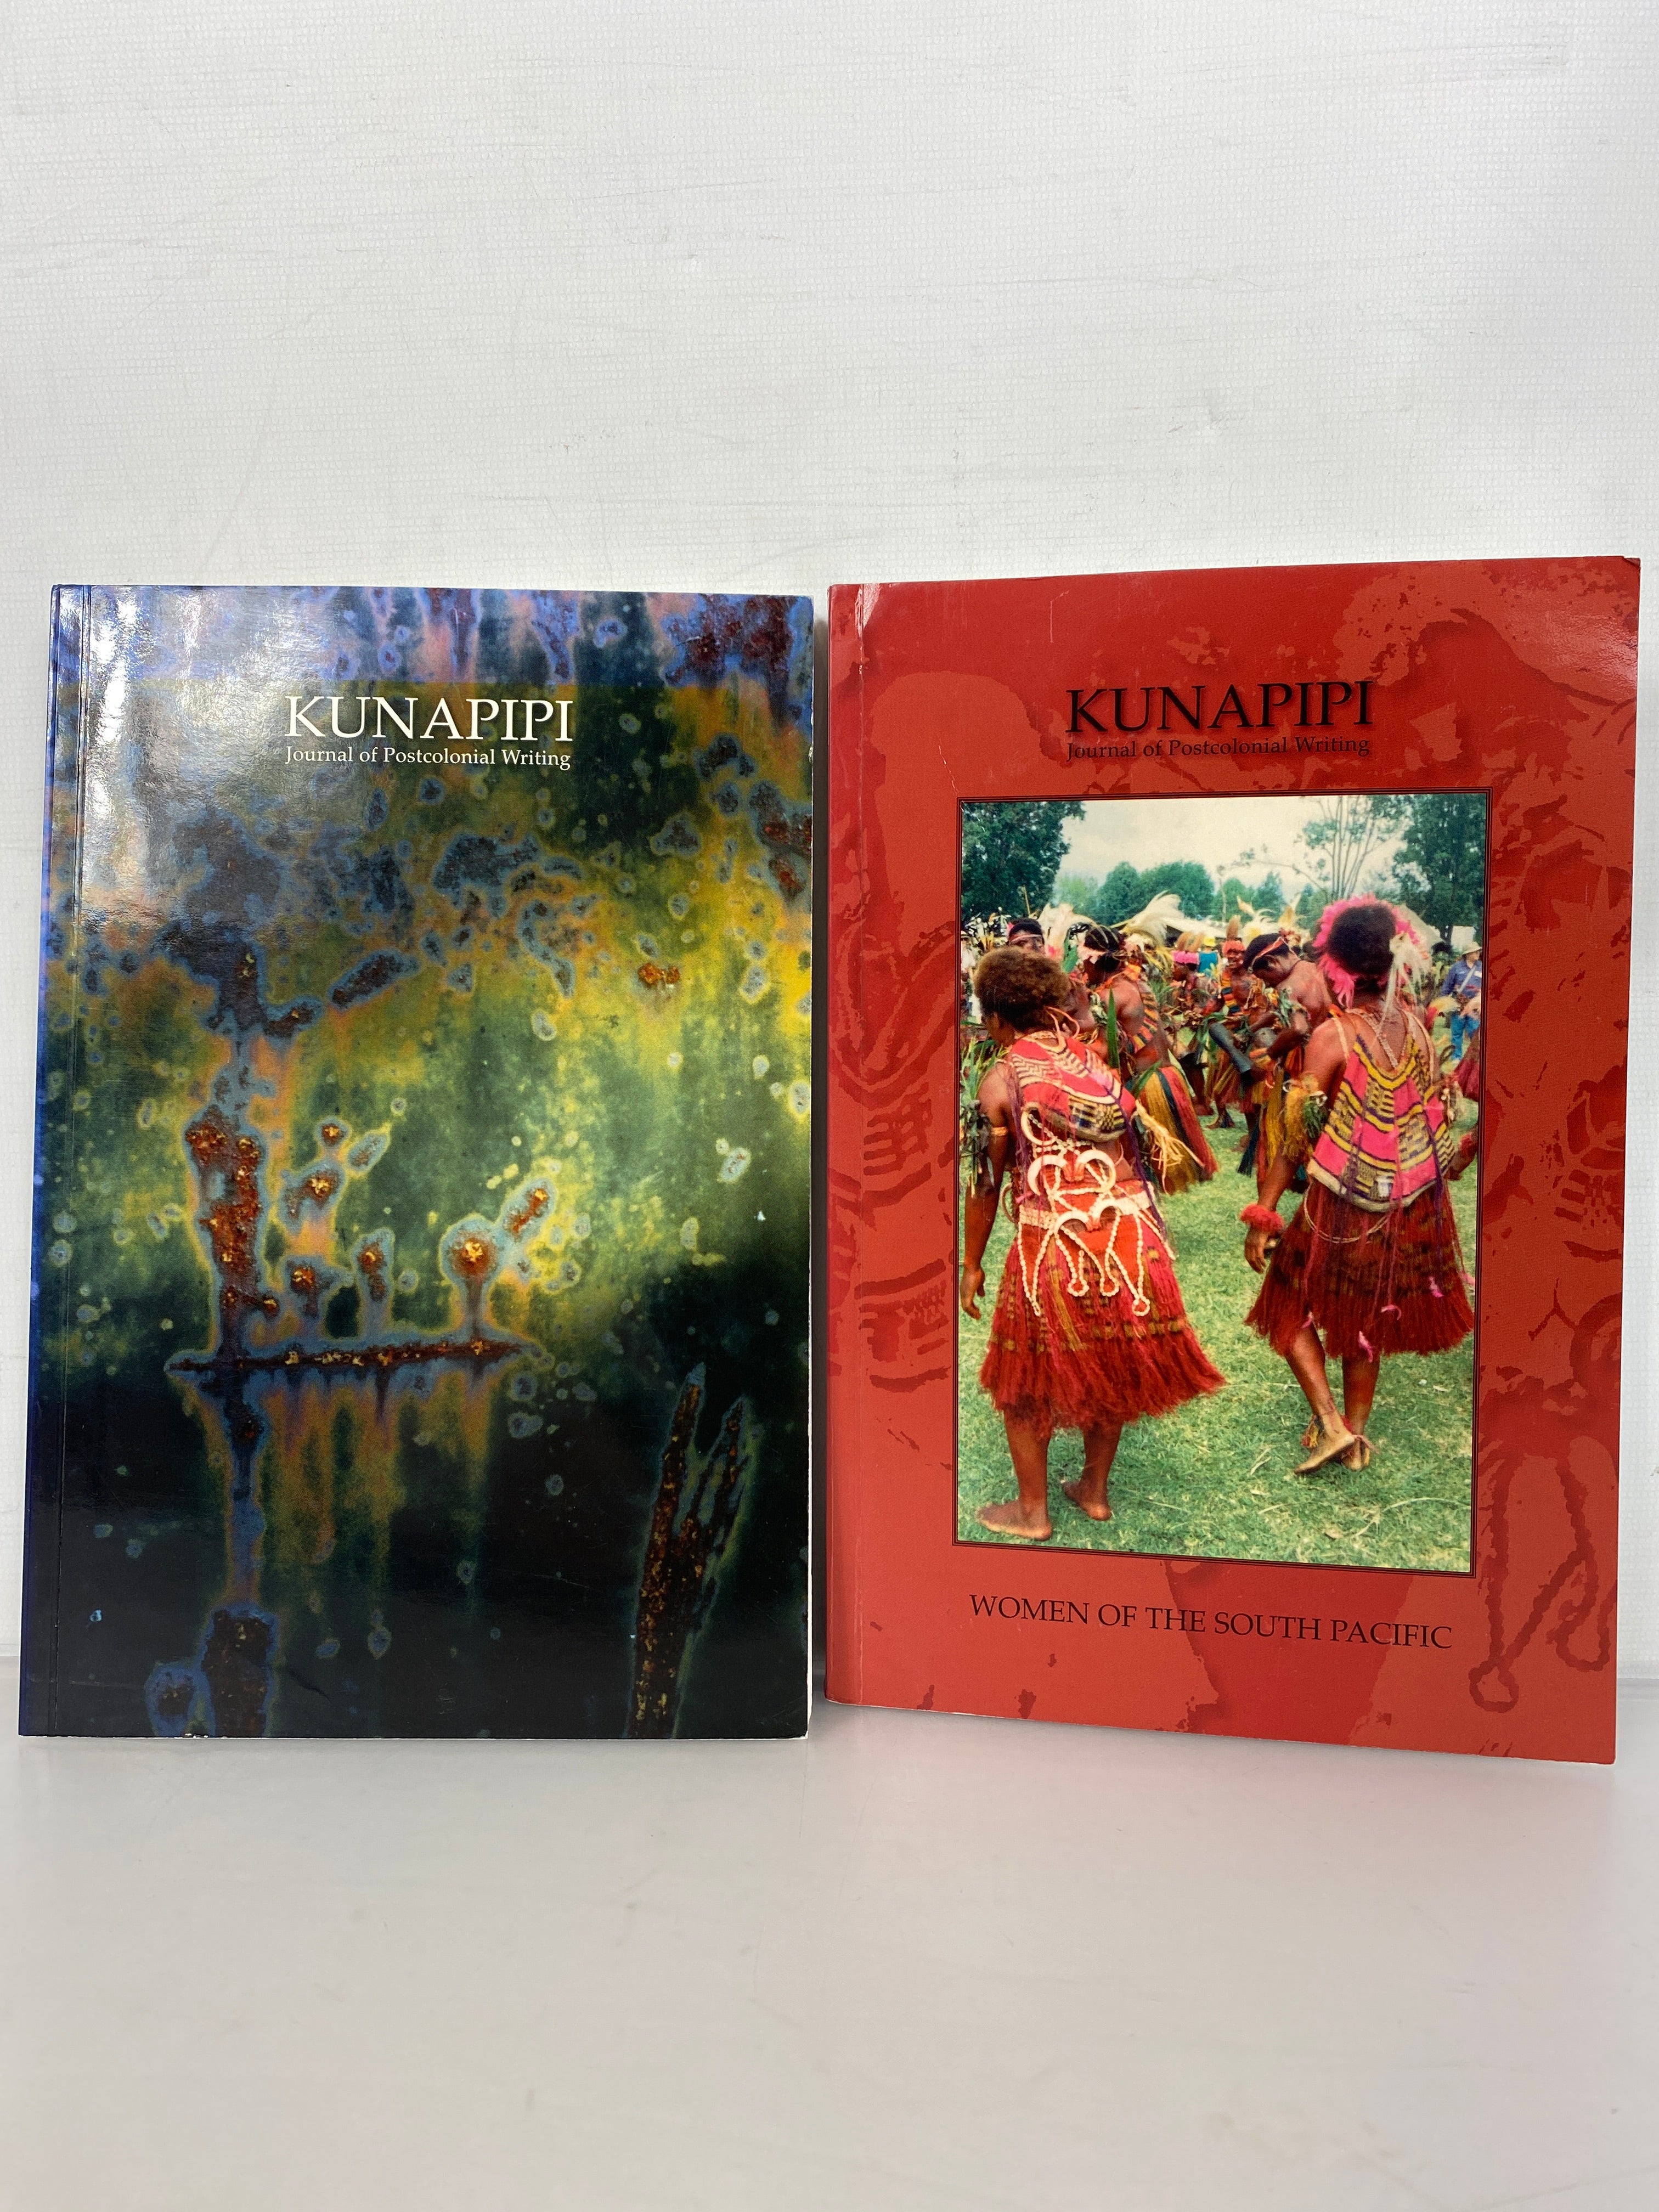 Lot of 2 Issues Kunapipi Journal of Postcolonial Writing Vol 27 Numbers 1 and 2 SC Rare